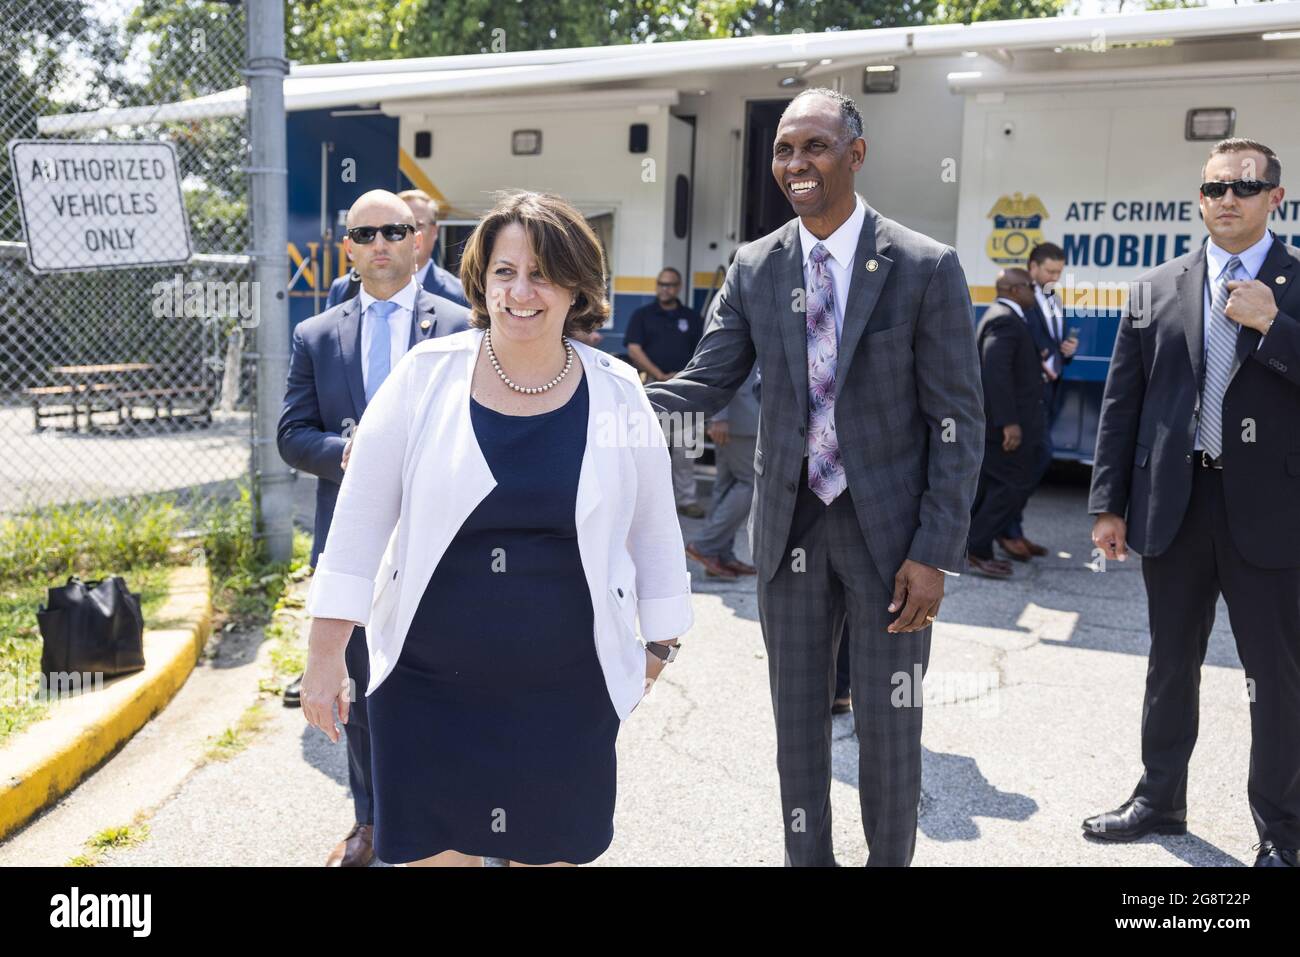 US Deputy Attorney General Lisa Monaco (L) and Acting Alcohol, Tobacco and Firearms (ATF) Director Marvin G. Richardson (C-R) depart after visiting an ATF crime gun intelligence mobile command center (MCC), which provides investigators with ballistic processing at crime scenes, in Washington, DC on July 22, 2021. The strike forces will seek to reduce firearms trafficking corridors, with a focus on New York, Chicago, Los Angeles, the San Francisco Bay and Sacramento Region, and Washington, DC. Pool Photo by Jim Lo Scalzo/UPI Stock Photo